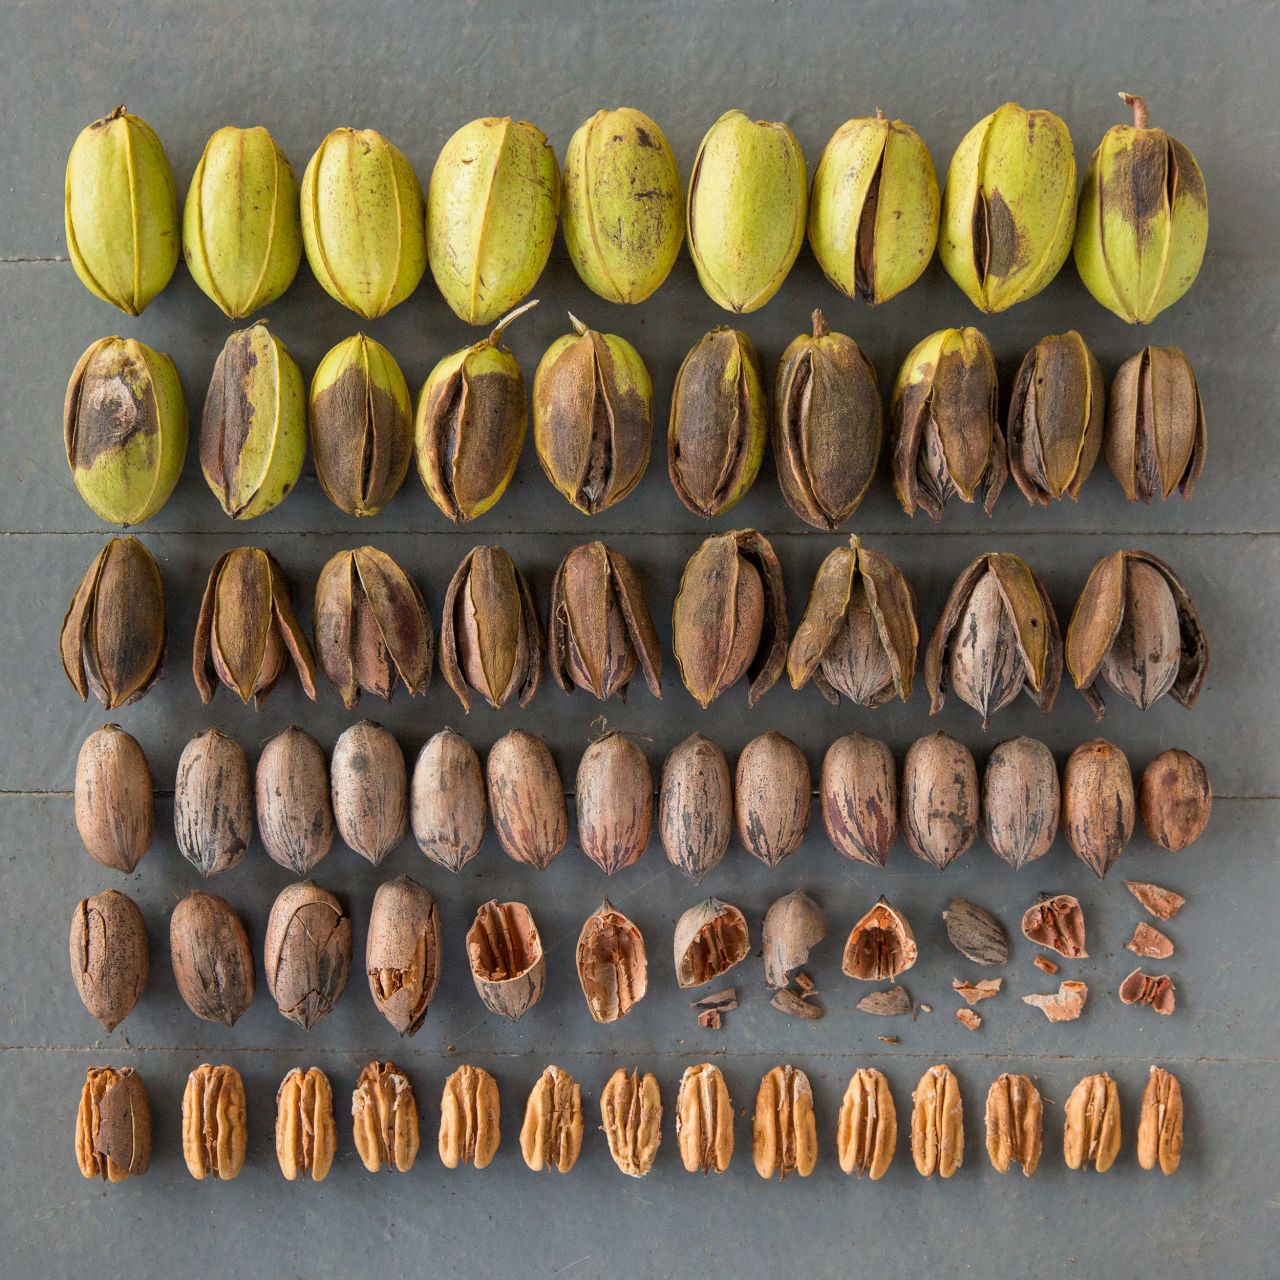 Going forward, she hopes to add a narrative element to the series, as was the case with this image of pecans at different stages of shelling. 